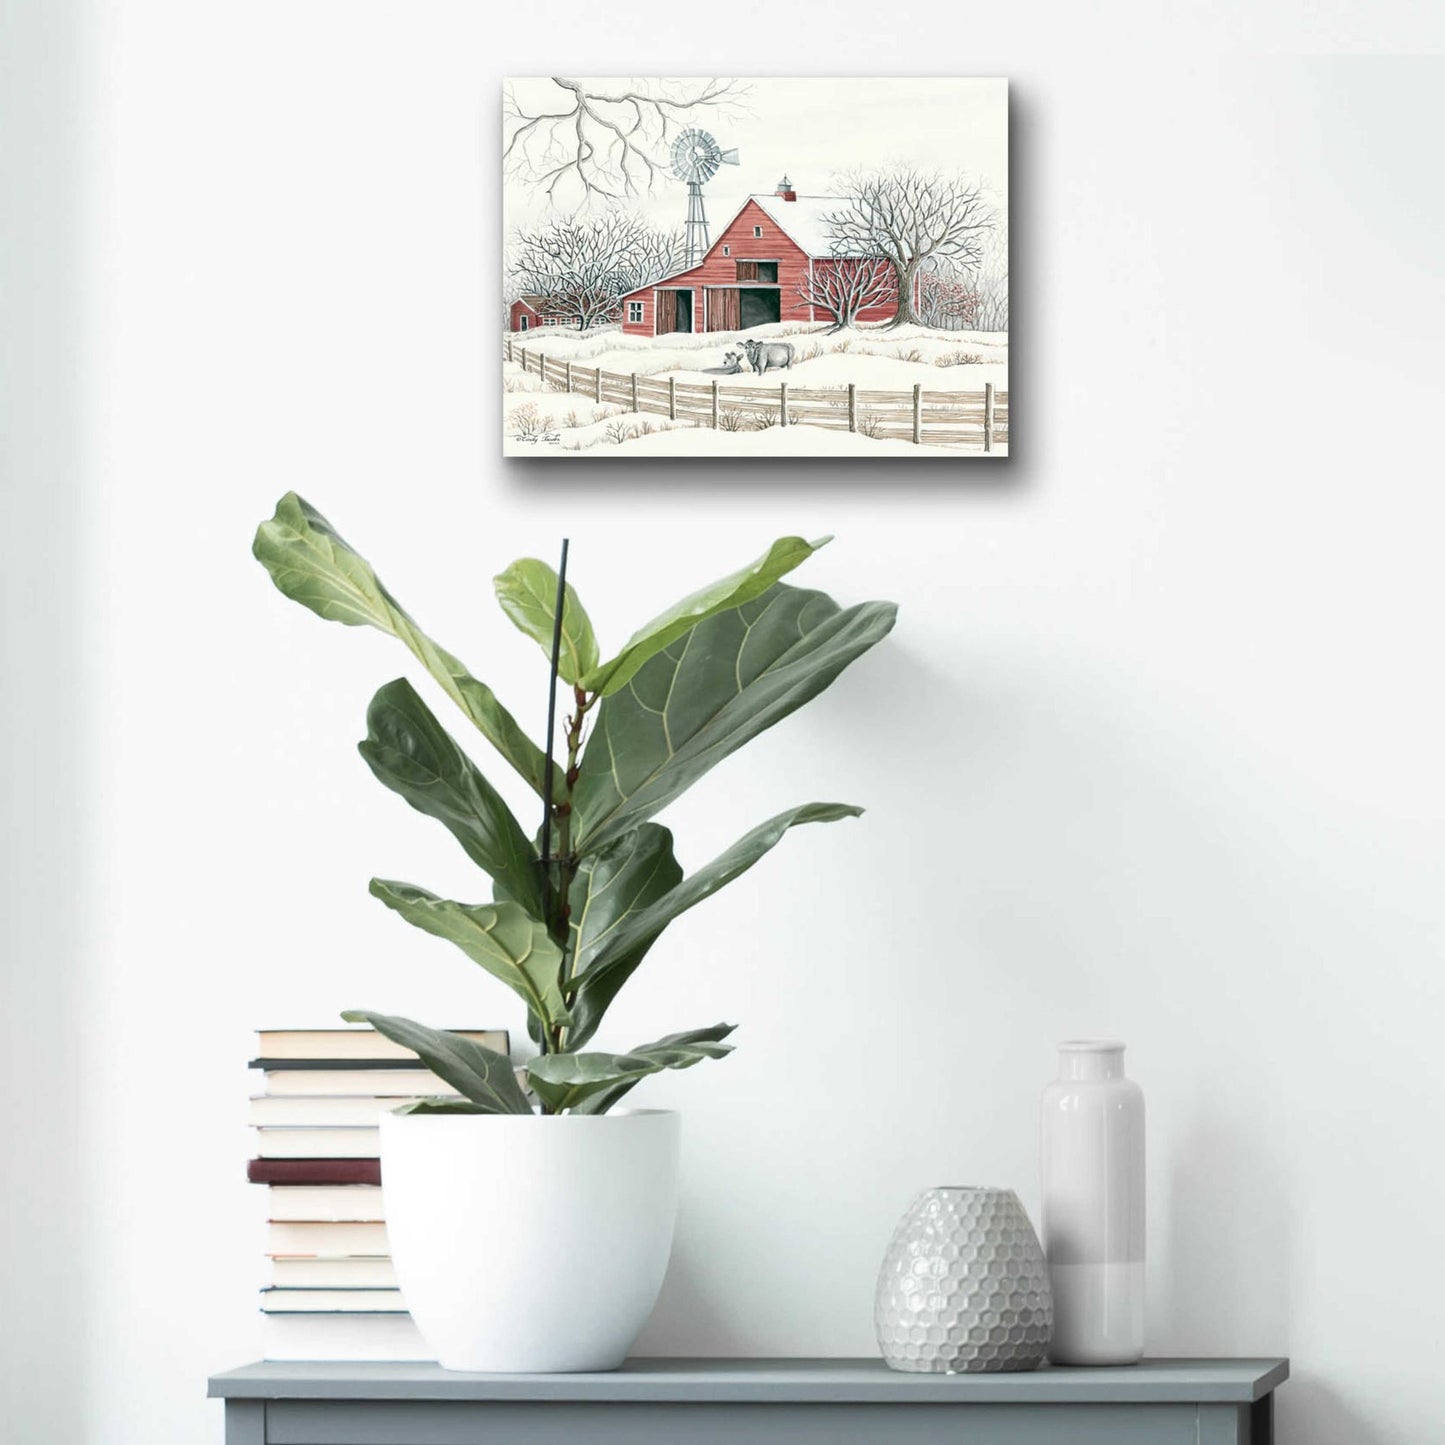 Epic Art 'Winter Barn with Windmill' by Cindy Jacobs, Acrylic Glass Wall Art,16x12